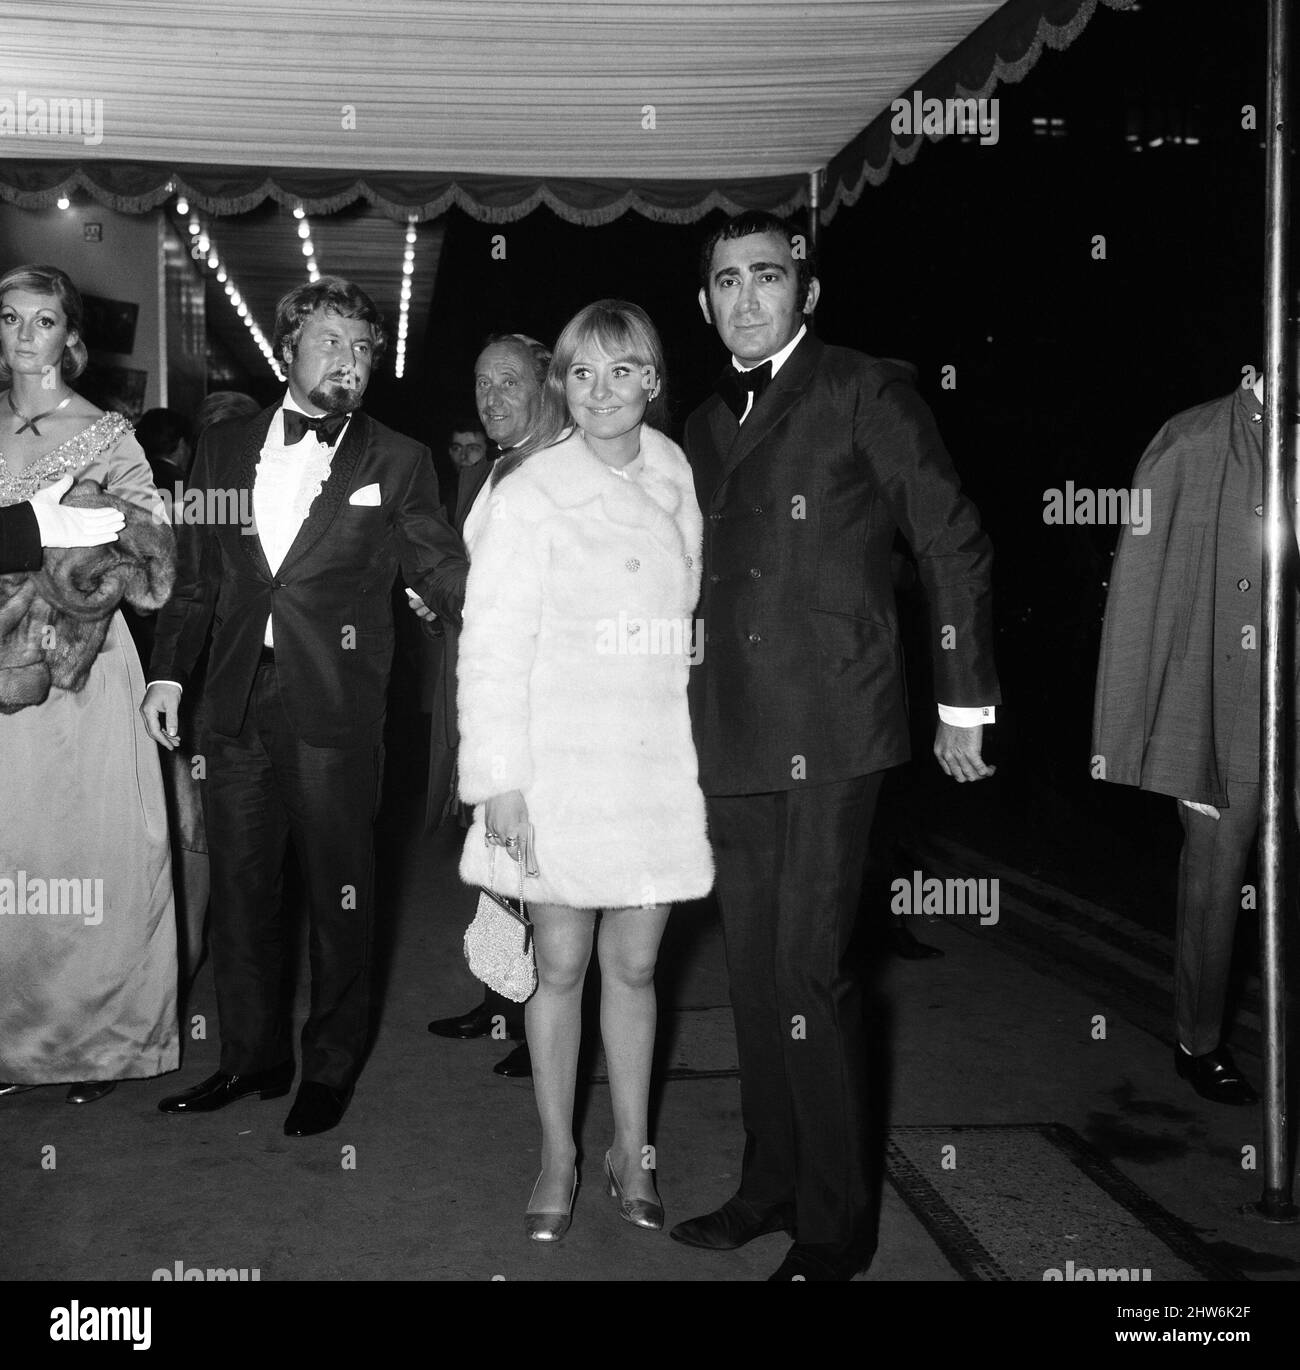 The Royal Charity Premier of 'Oliver!' in the presence of HRH Princess Margaret and Lord Snowdon, in aid o the NSPCC, sponsored by the Variety Club. Singer Lulu arrives at the Odeon with Lionel Bart, writer and composer of the film. Odeon Theatre, Leicester Square. 26th September 1968. Stock Photo